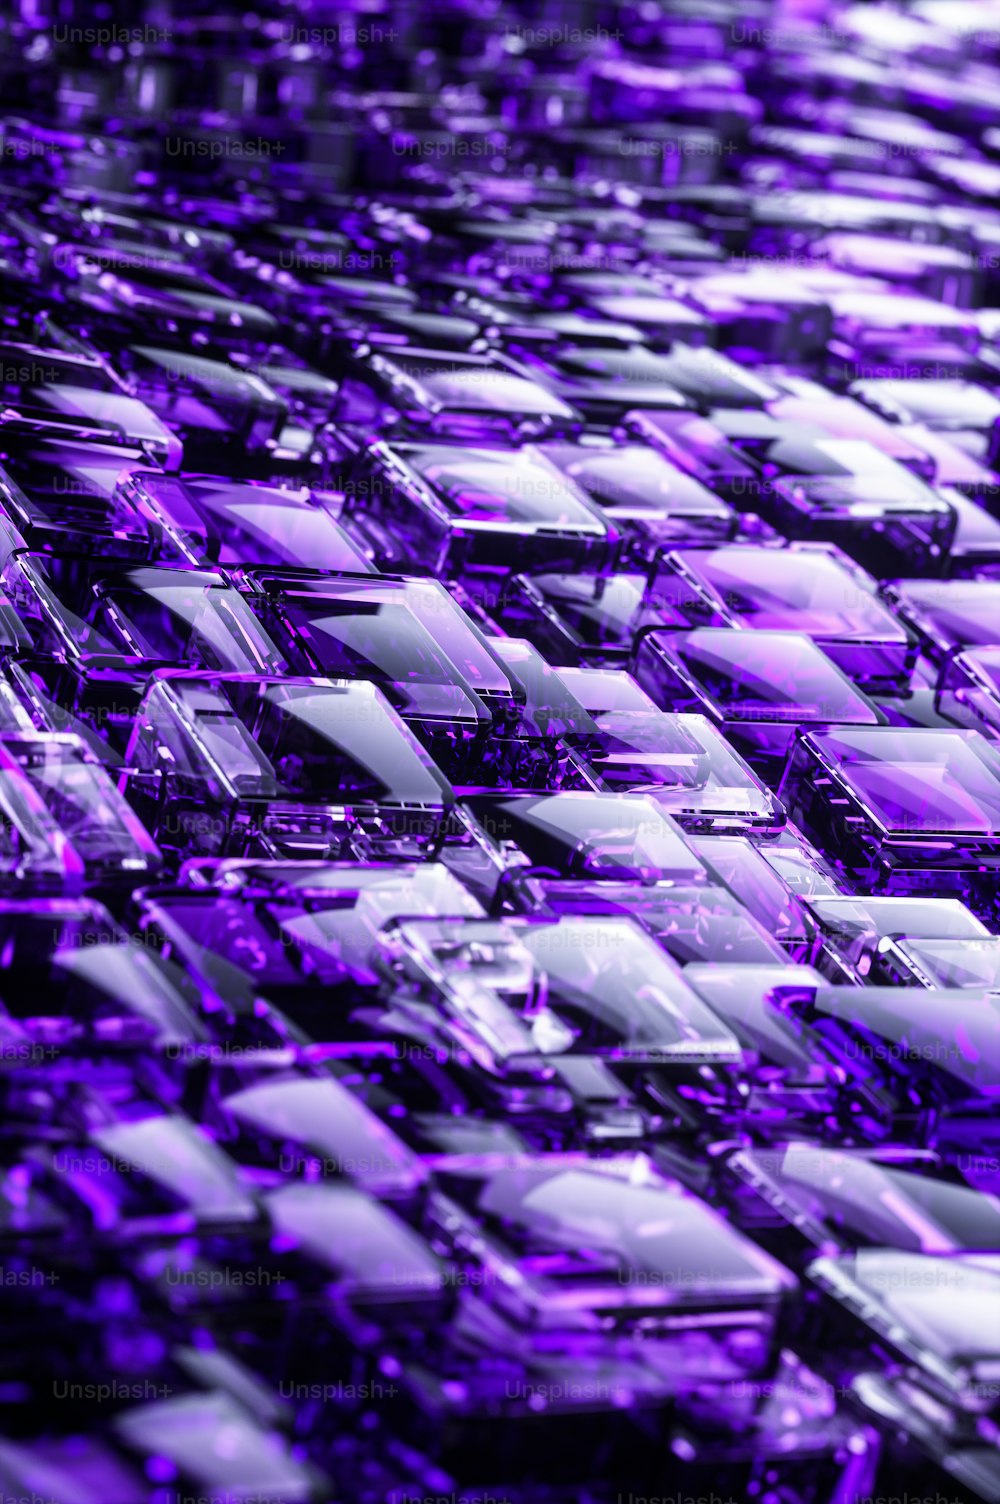 a lot of cars that are purple in color